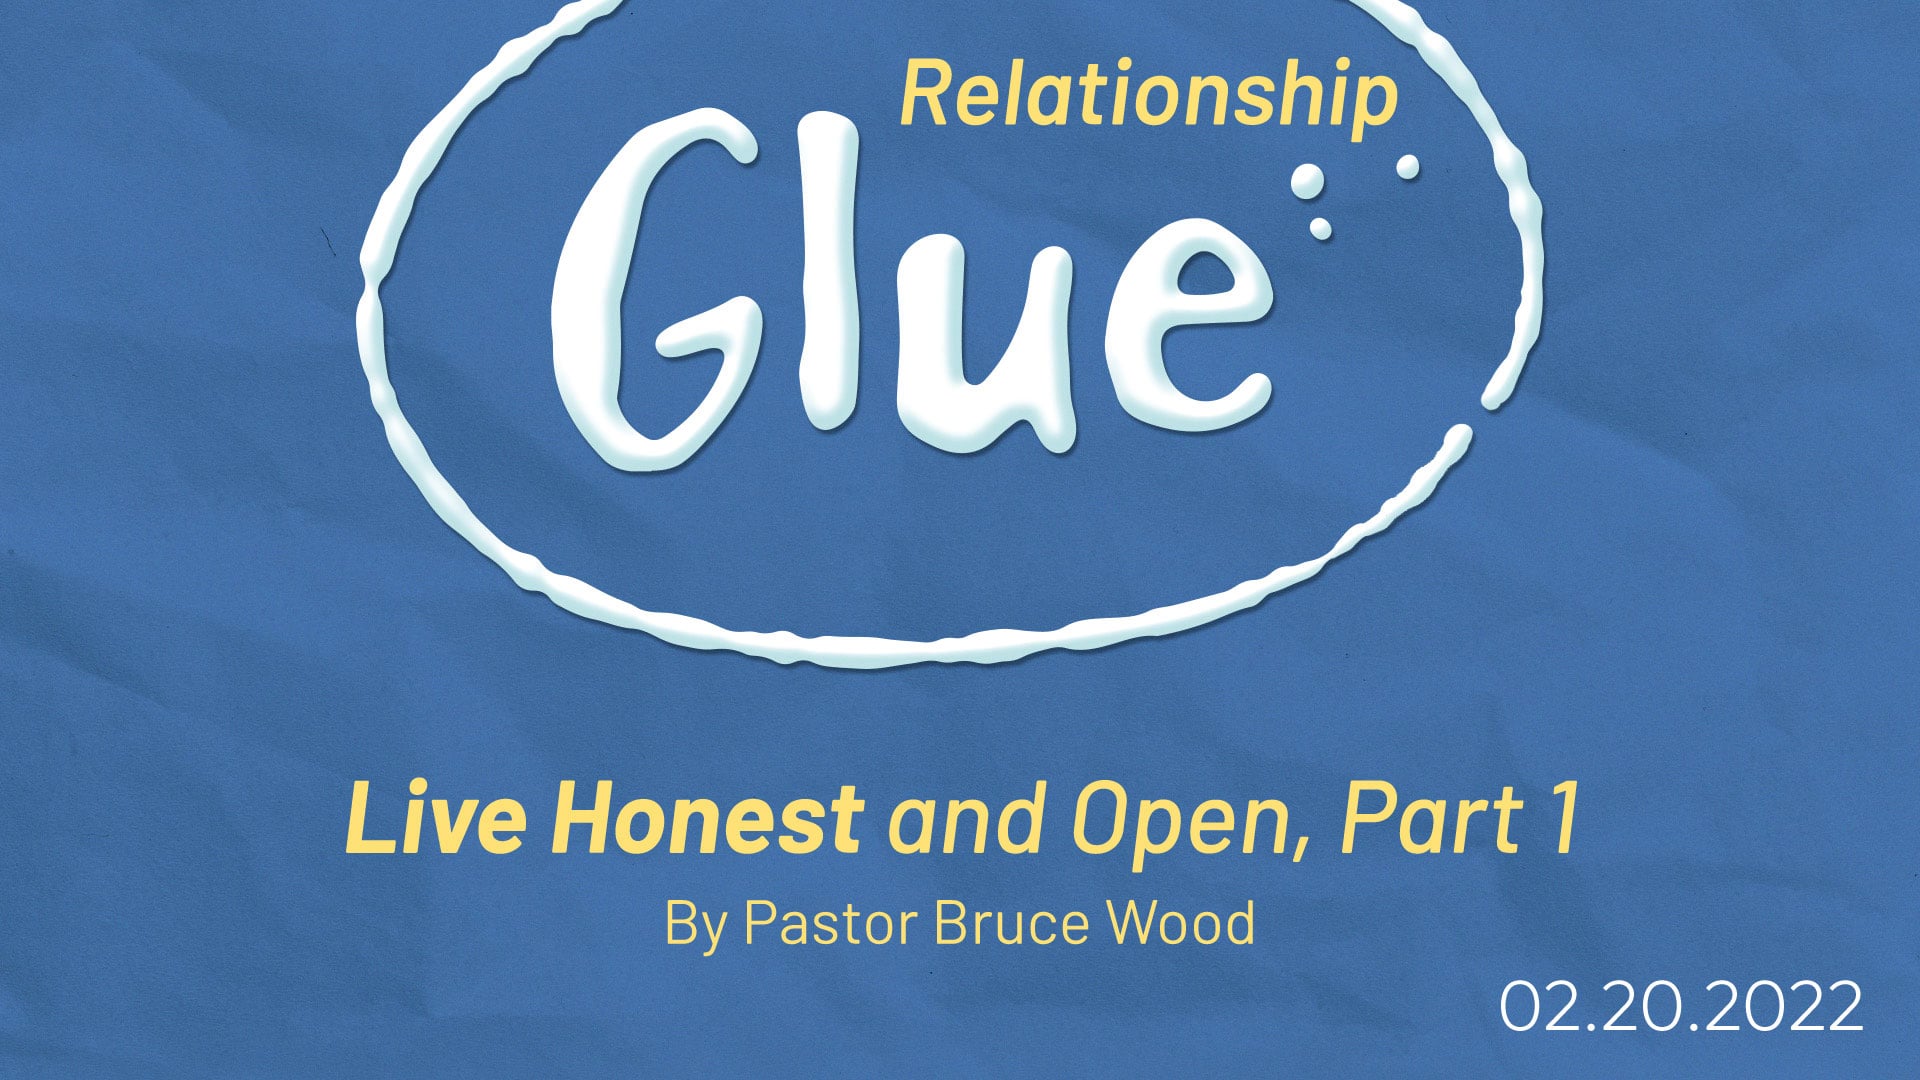 Relationship Glue - Part 3a: Live Honest and Open